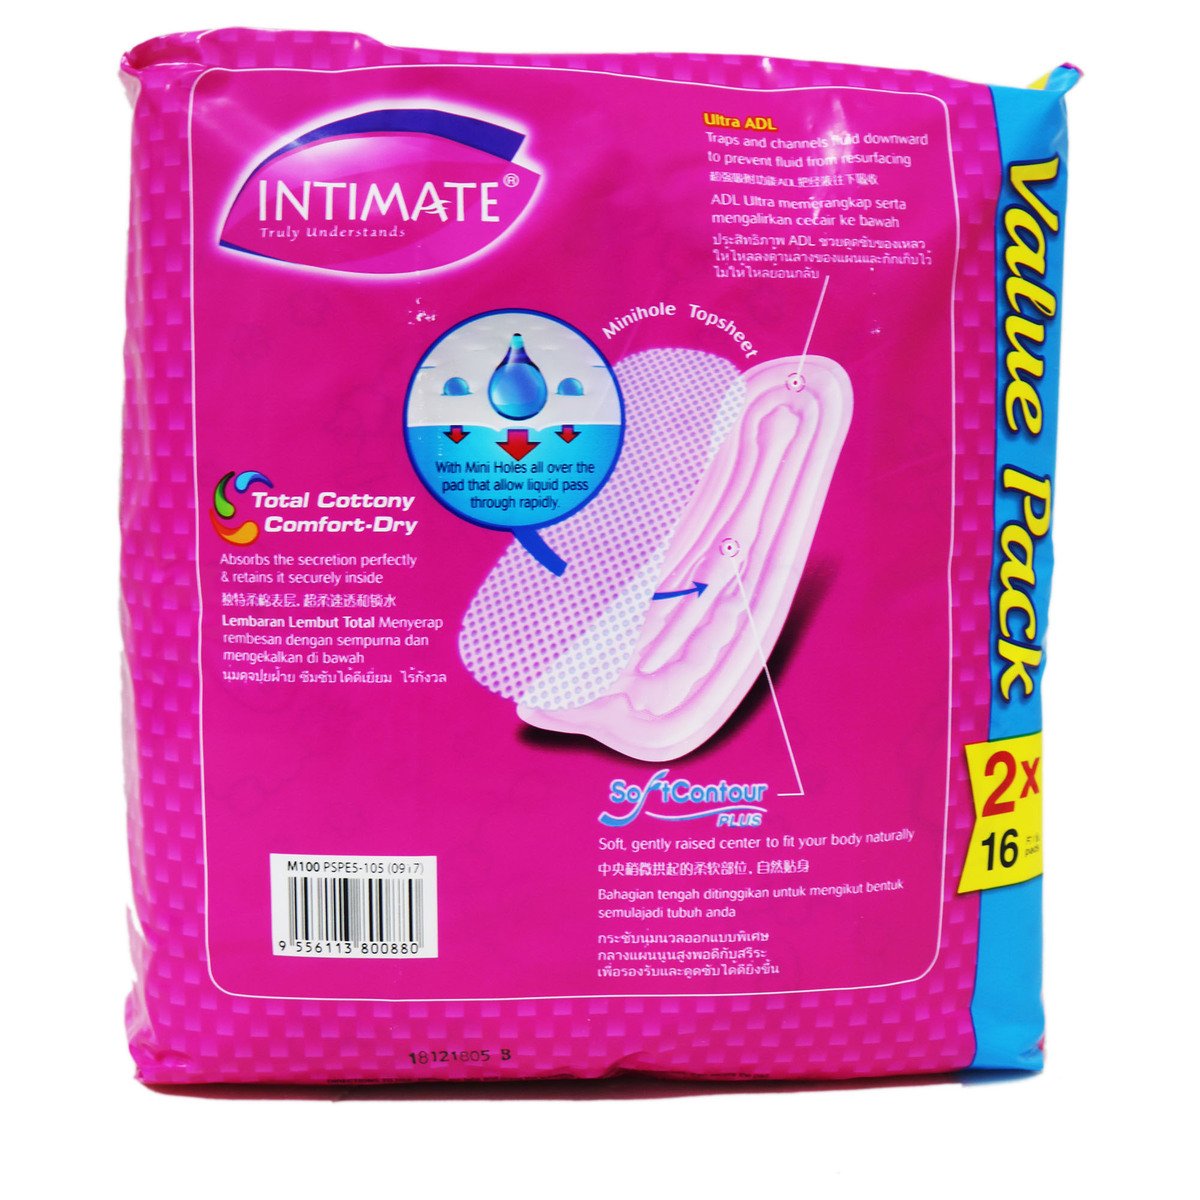 Intimate Night Long Maxi Nonwing 2 x 16 Counts